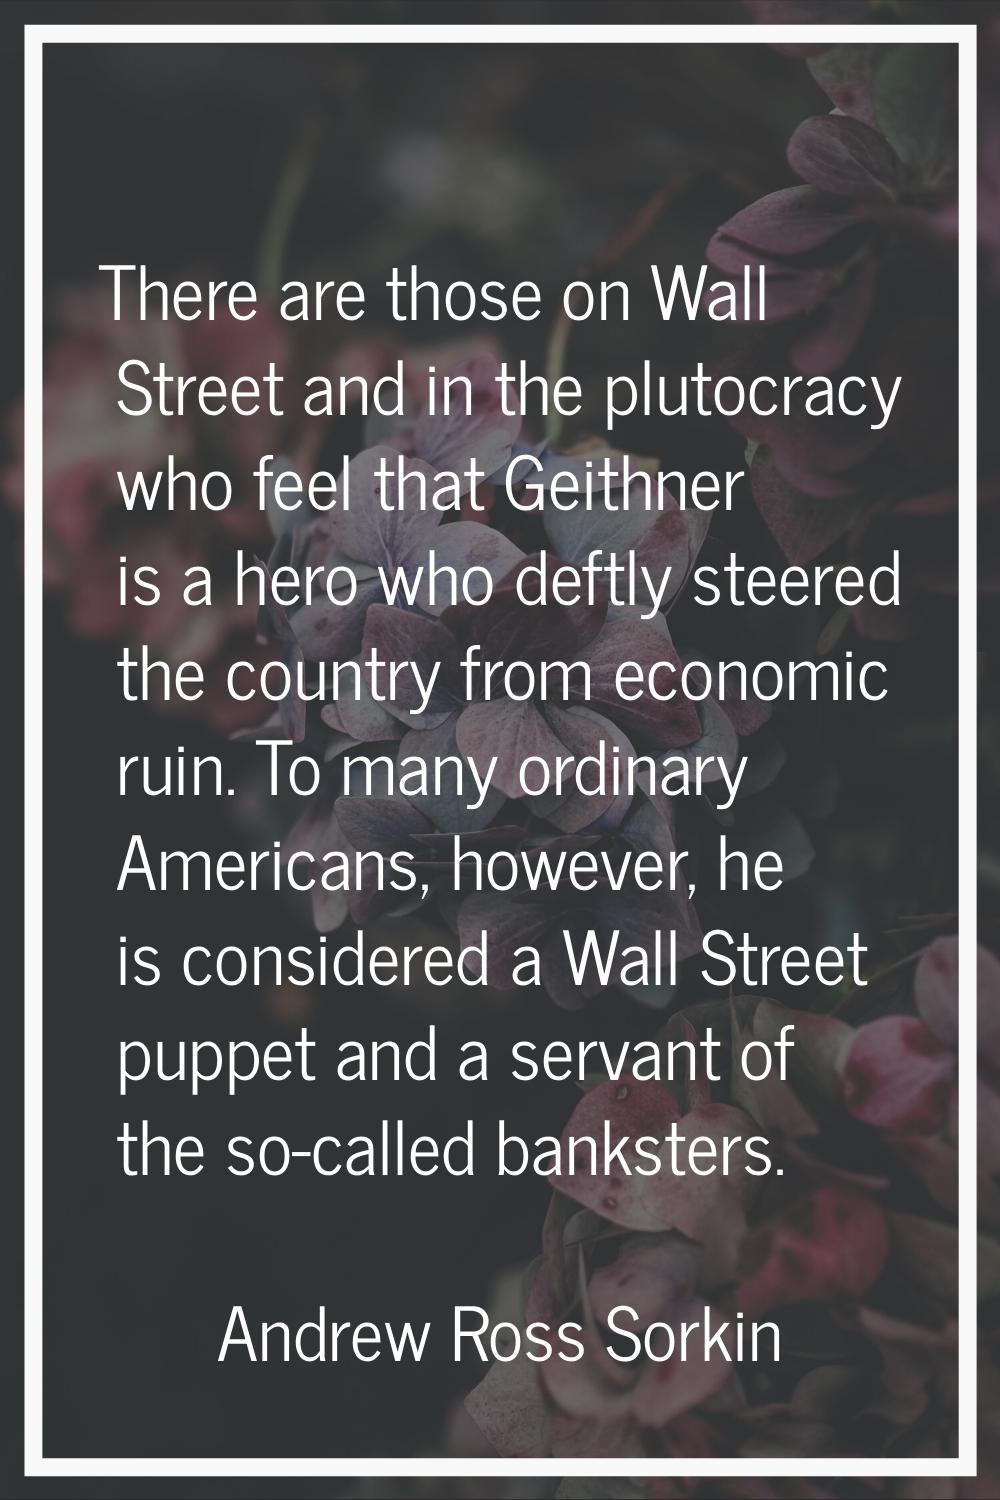 There are those on Wall Street and in the plutocracy who feel that Geithner is a hero who deftly st